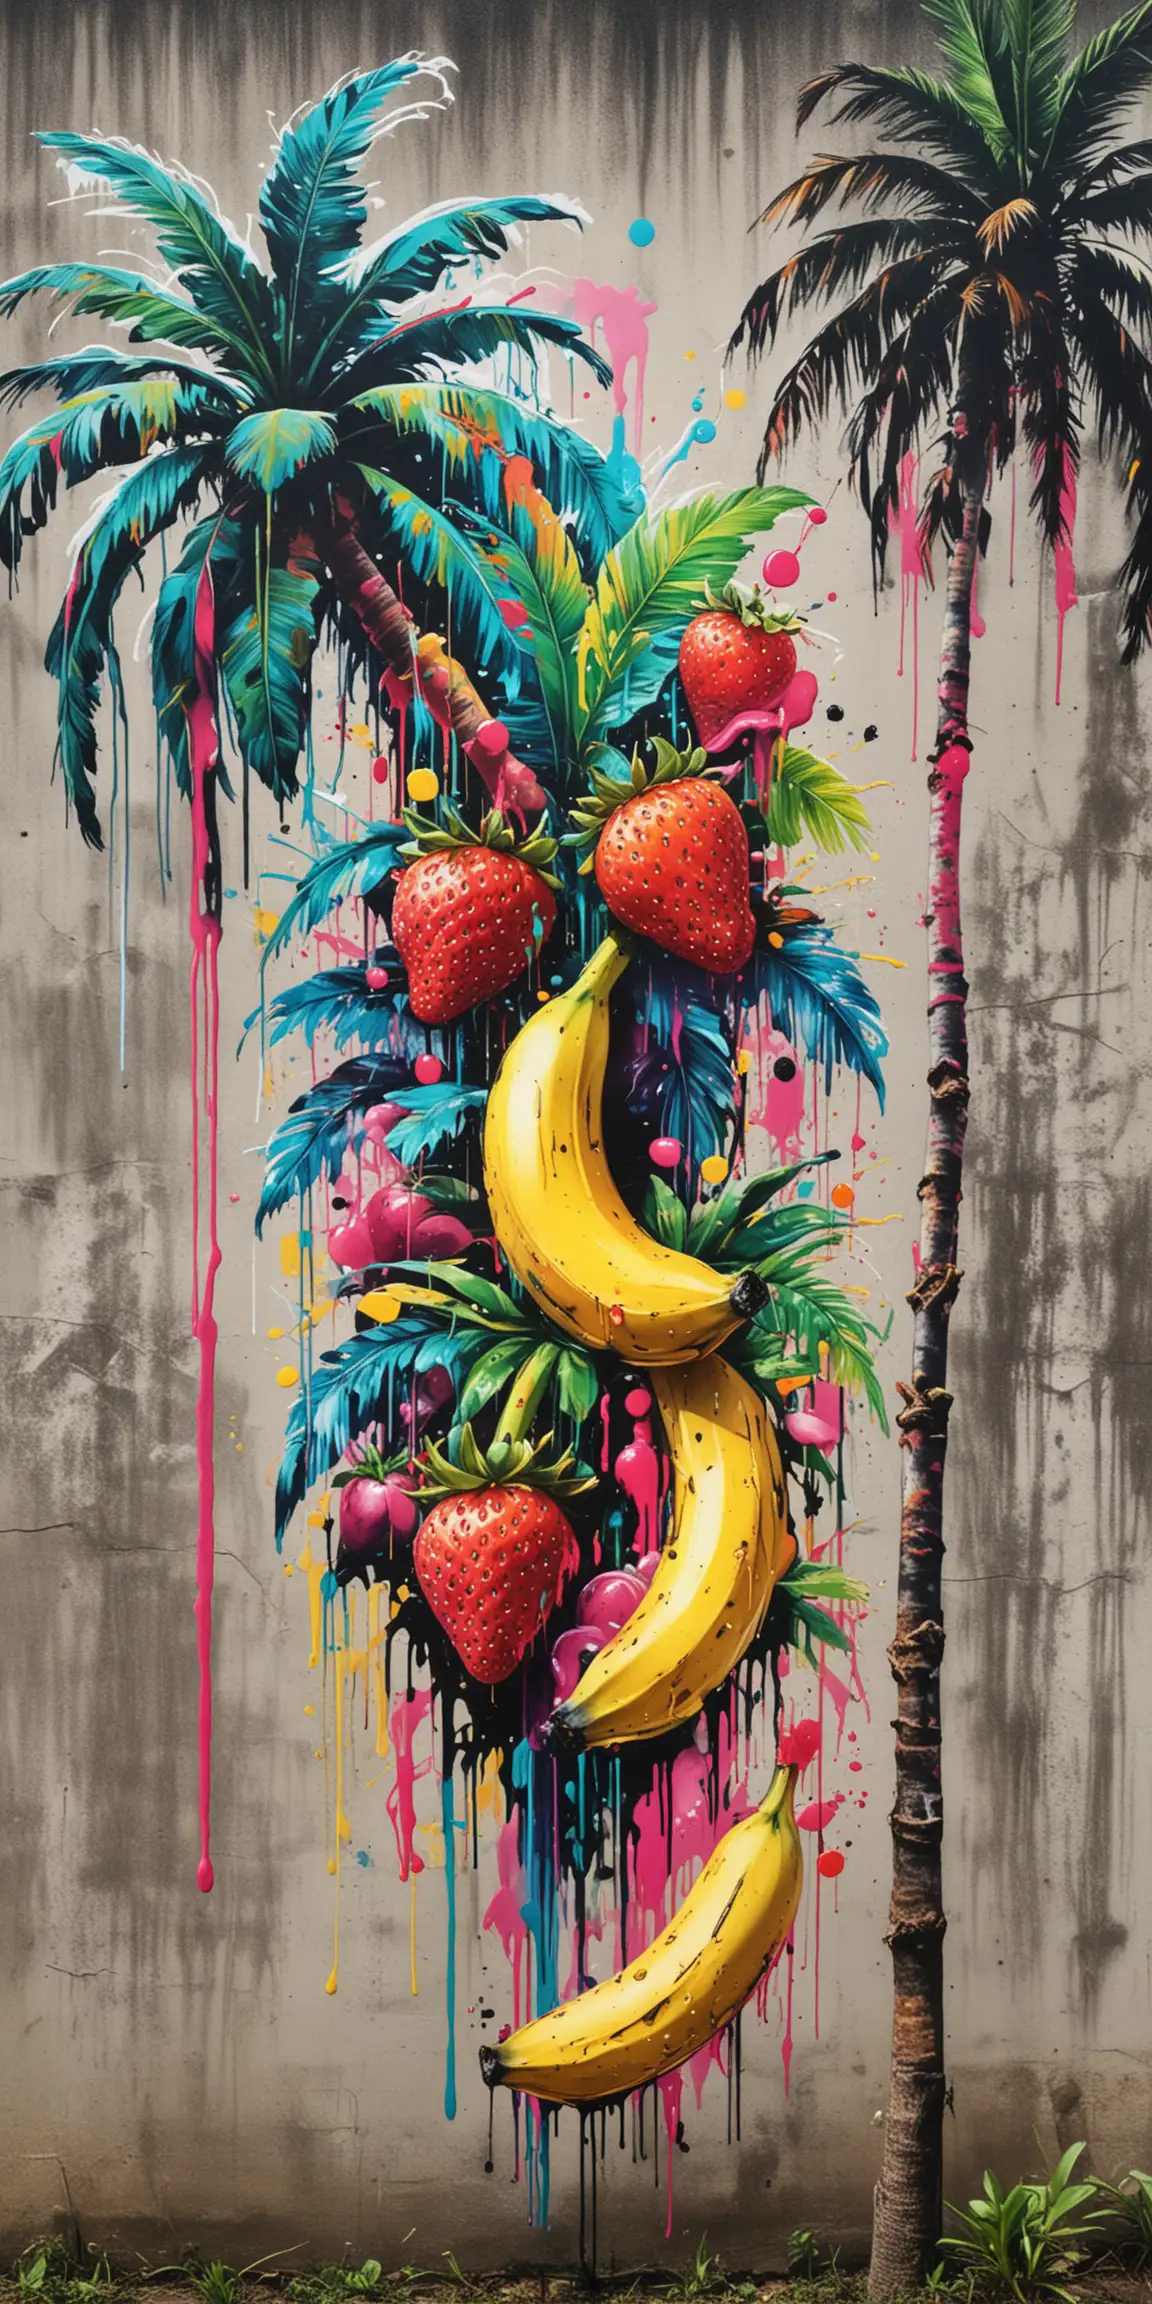 Colorful 80s Graffiti with Tropical Fruit and Palm Trees Vibrant Paint Drips Art